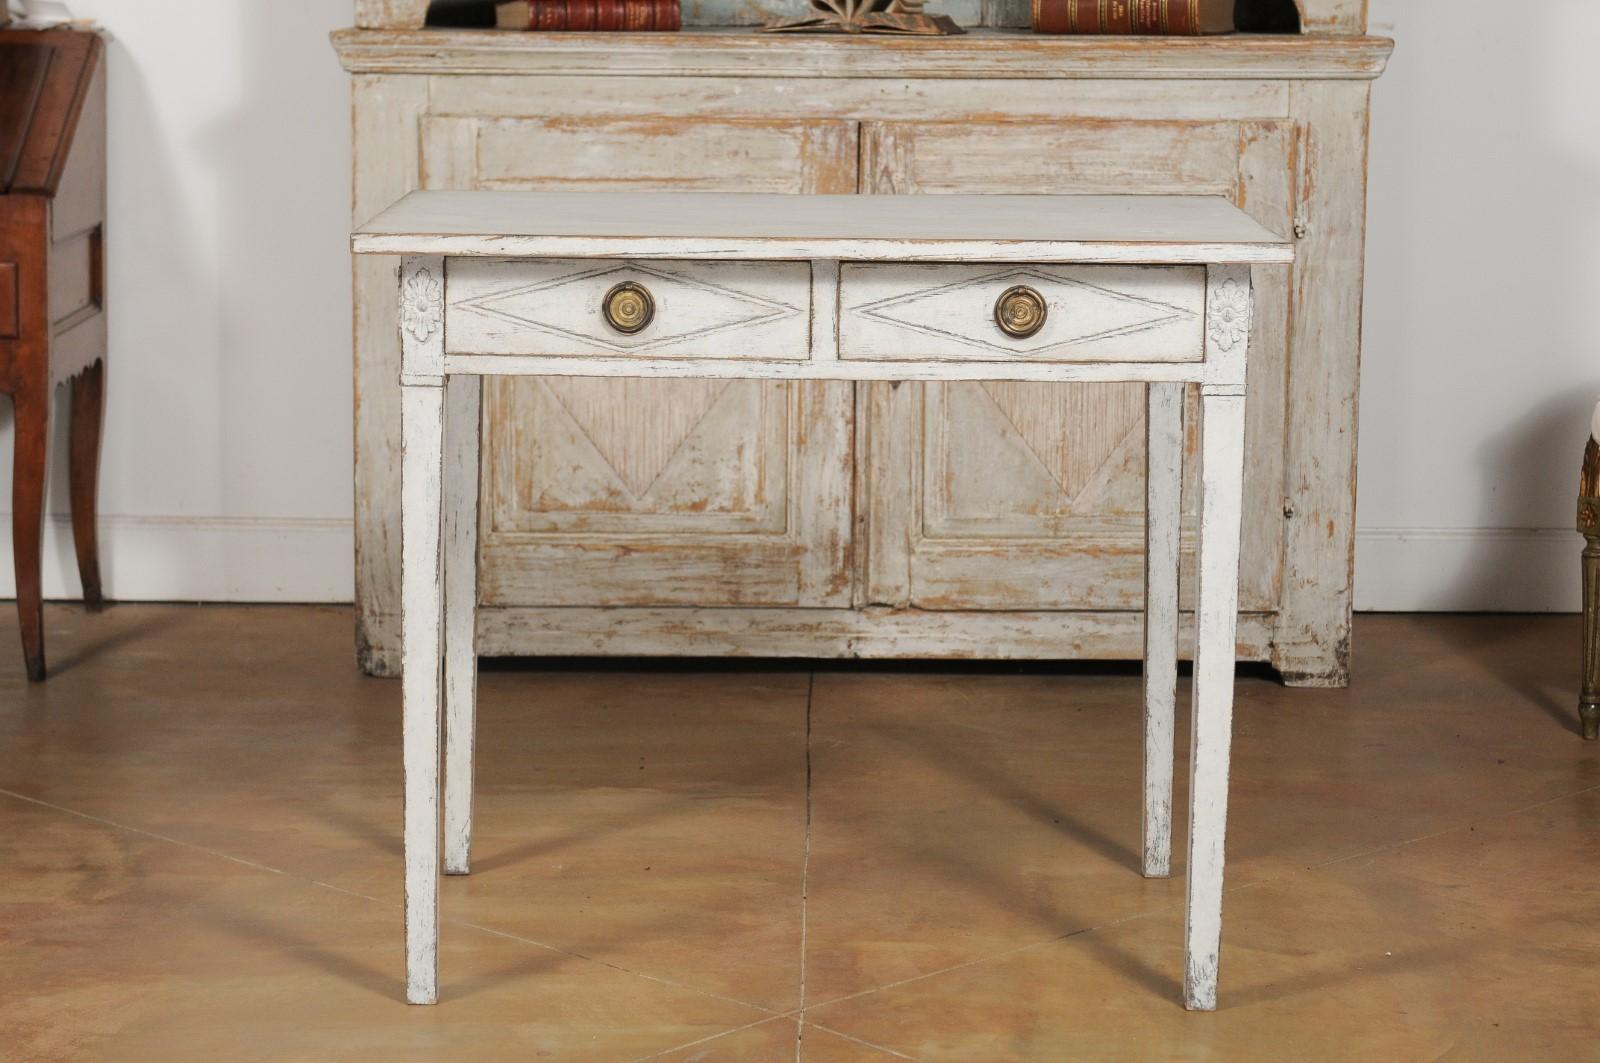 Swedish Gustavian Style Painted Wood Desk with Two Drawers and Diamond Motifs 14